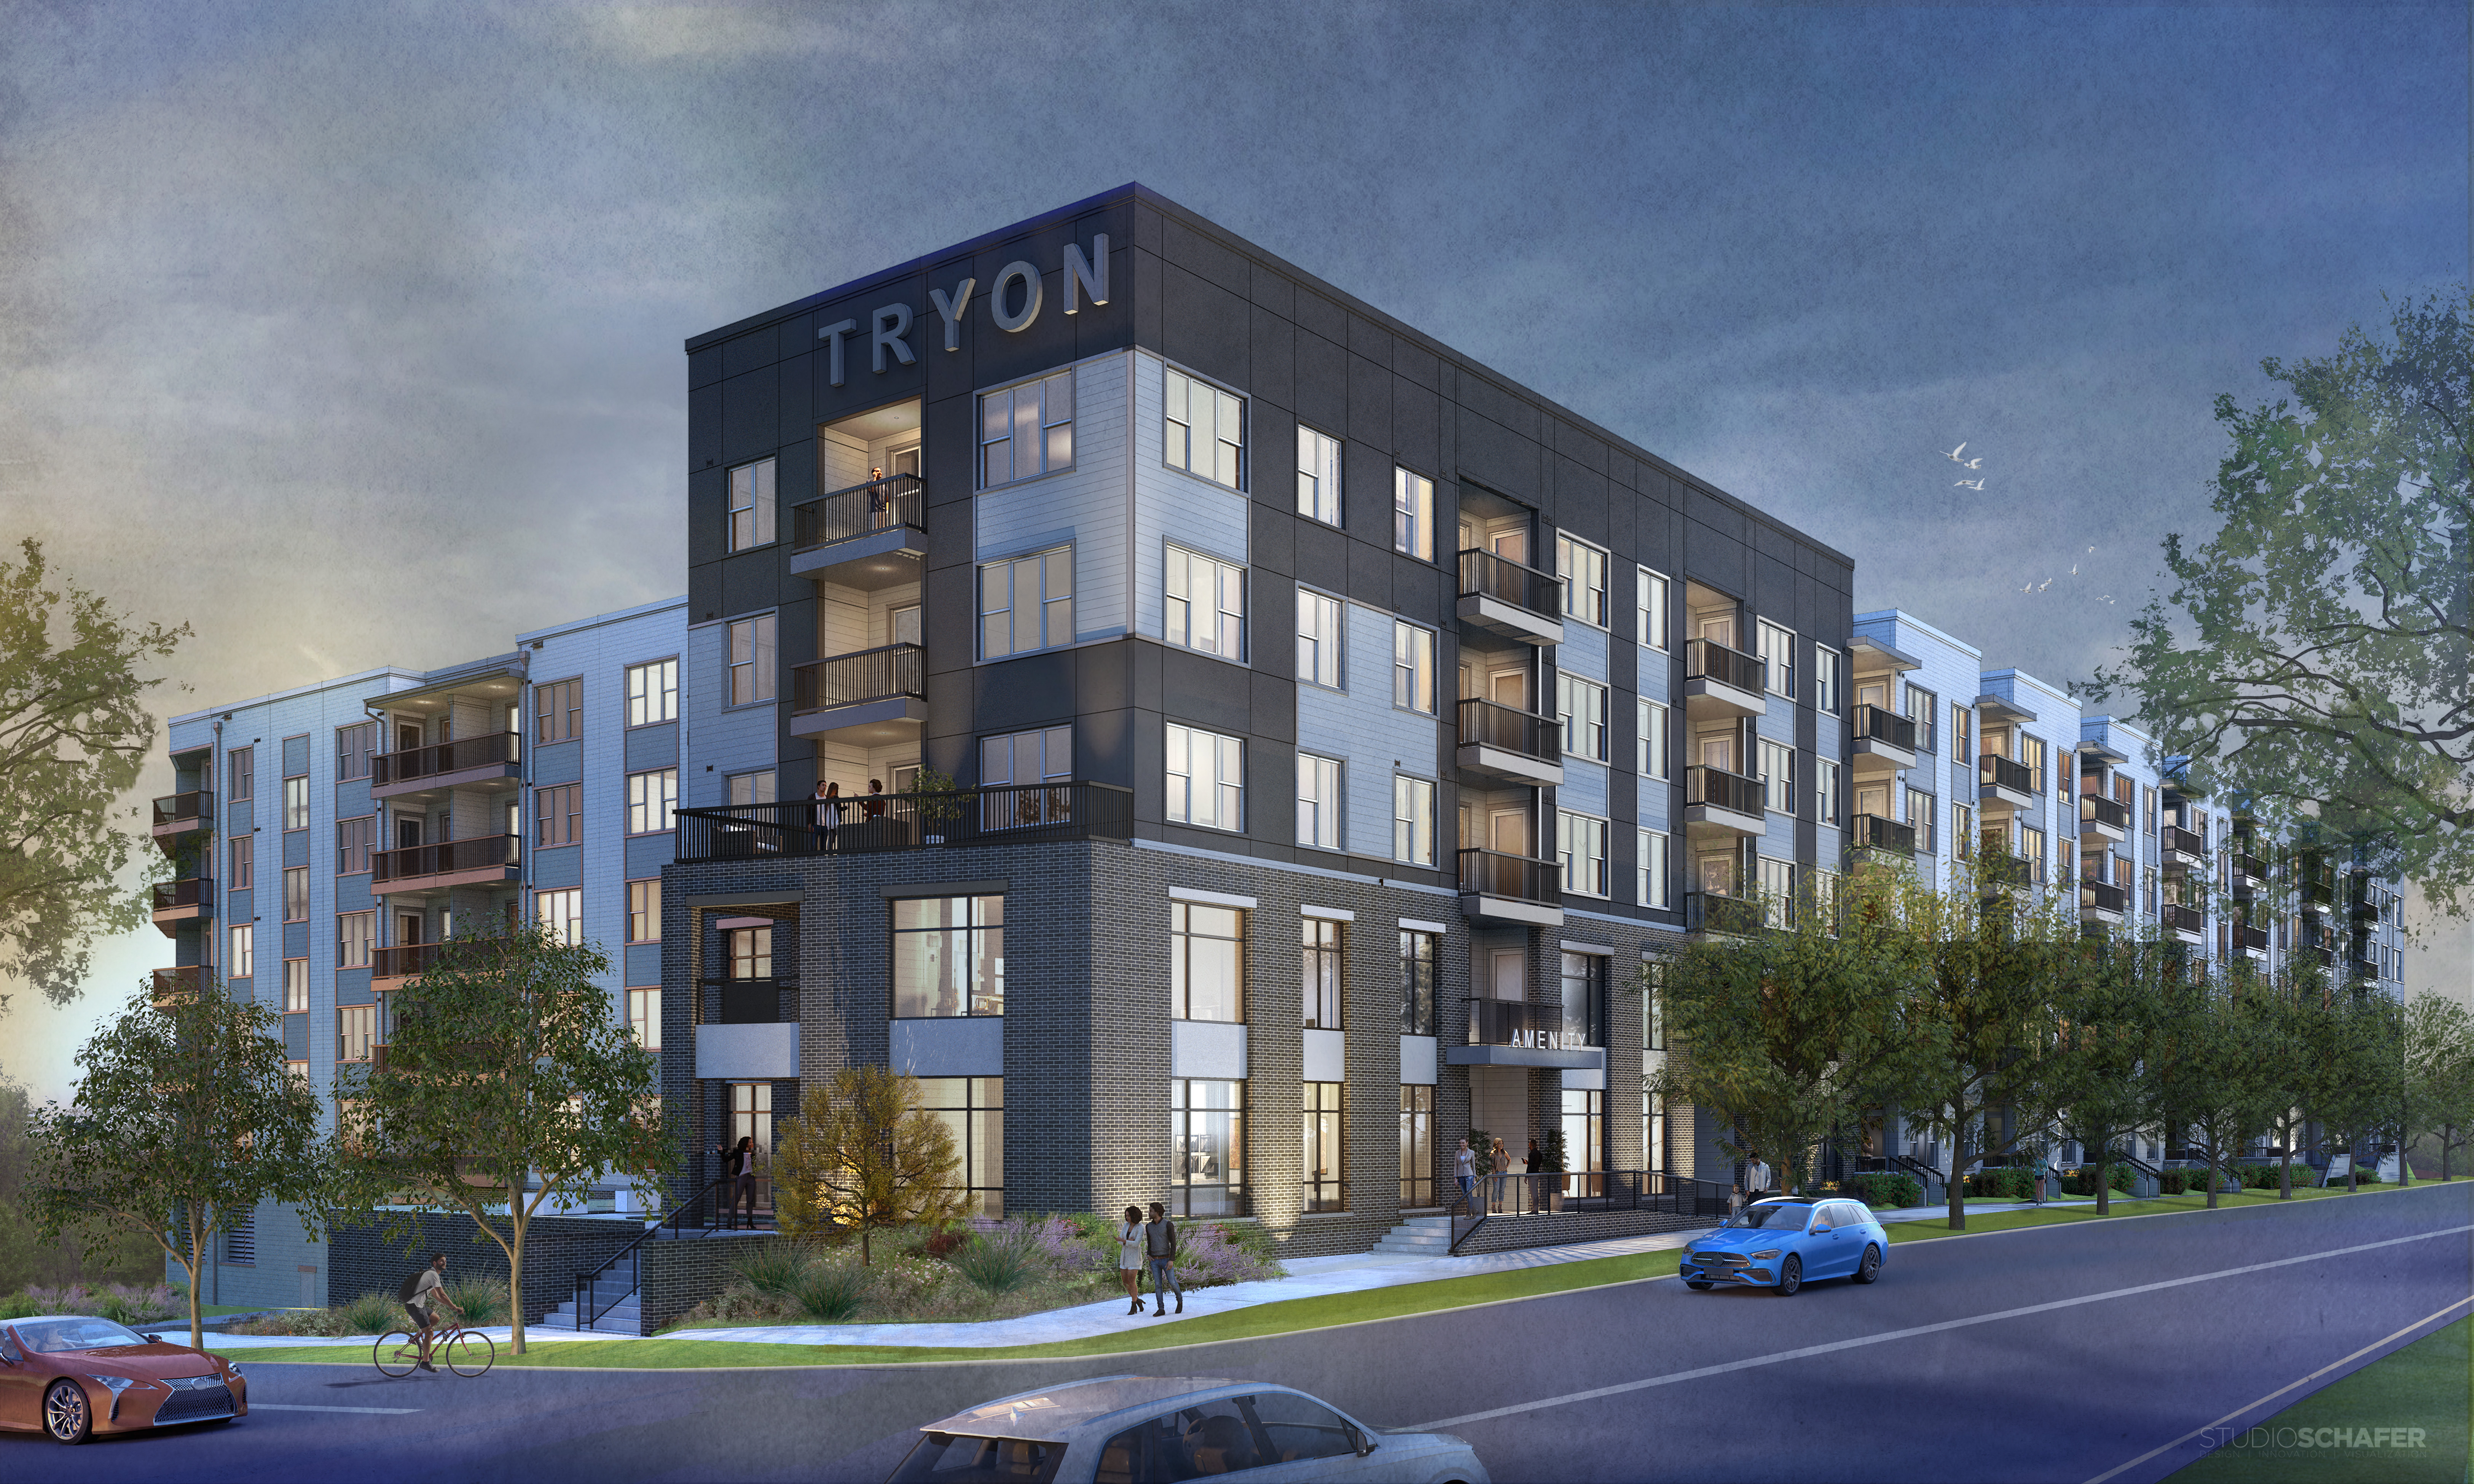 The NRP Group, Canyon Partners, CIBC Bank USA Break Ground on 310-Unit South Tryon Apartment Community in Charlotte